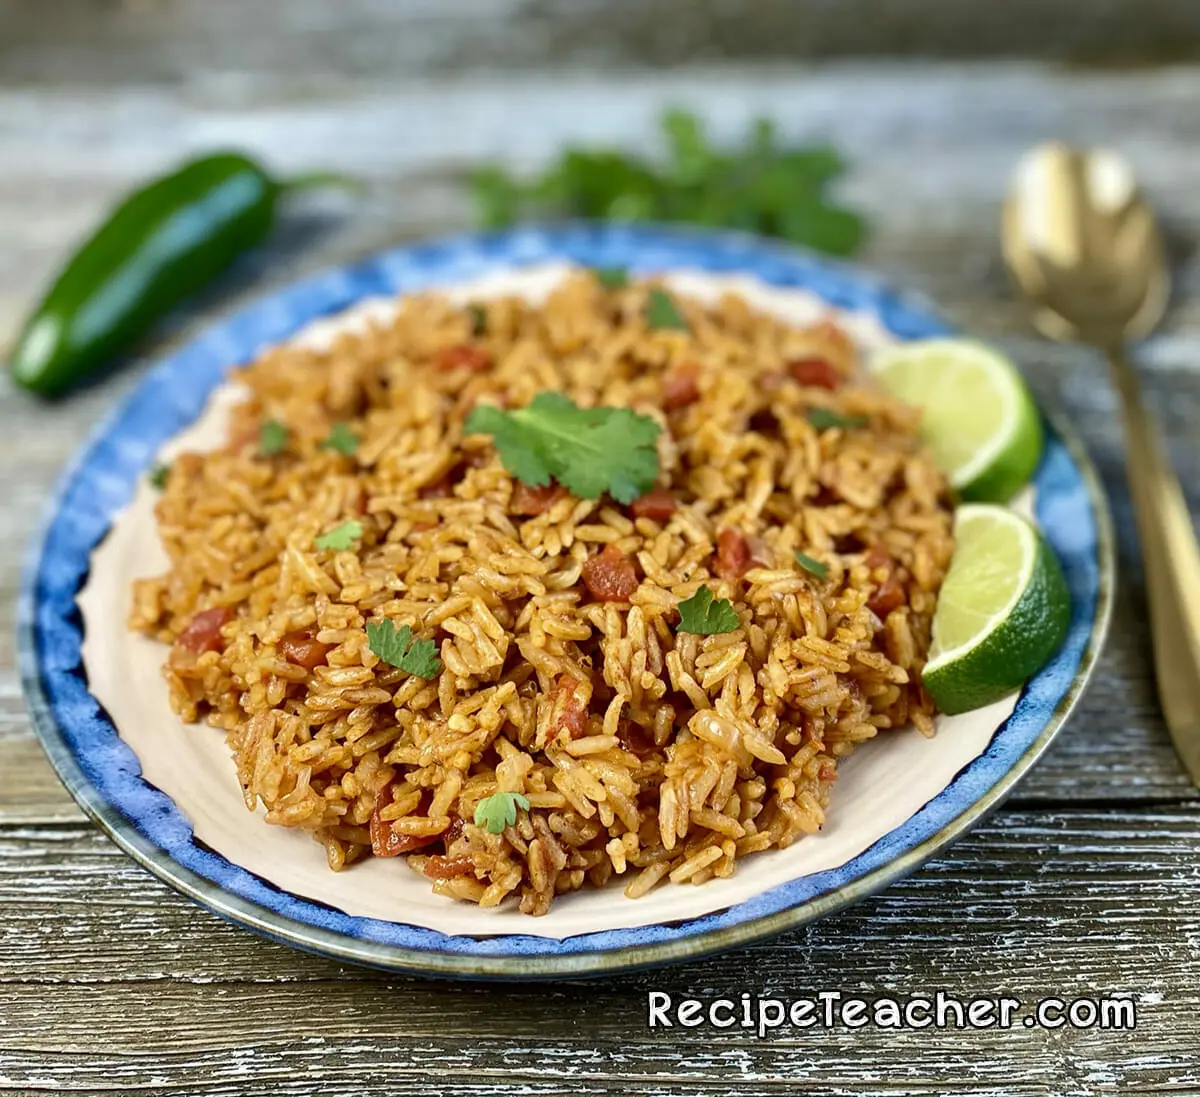 A plate of Instant Pot Spanish rice.